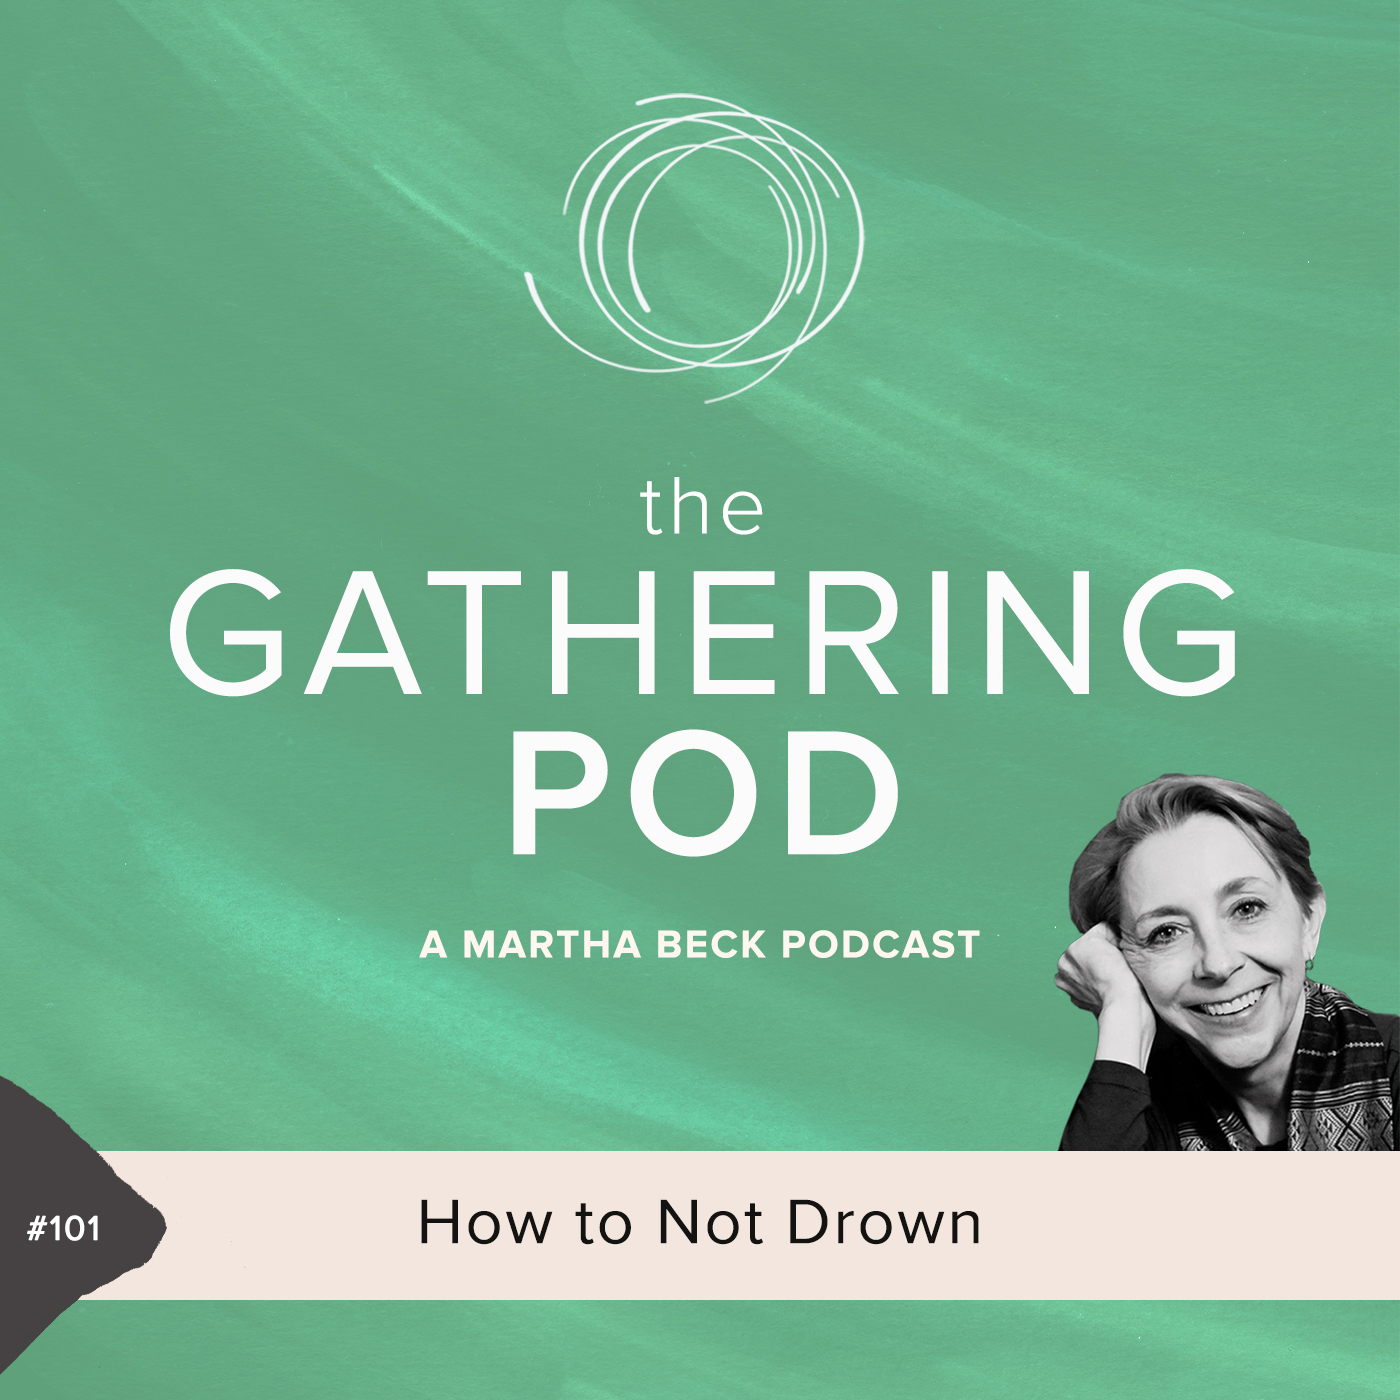 Image for The Gathering Pod A Martha Beck Podcast Episode #101 How to Not Drown